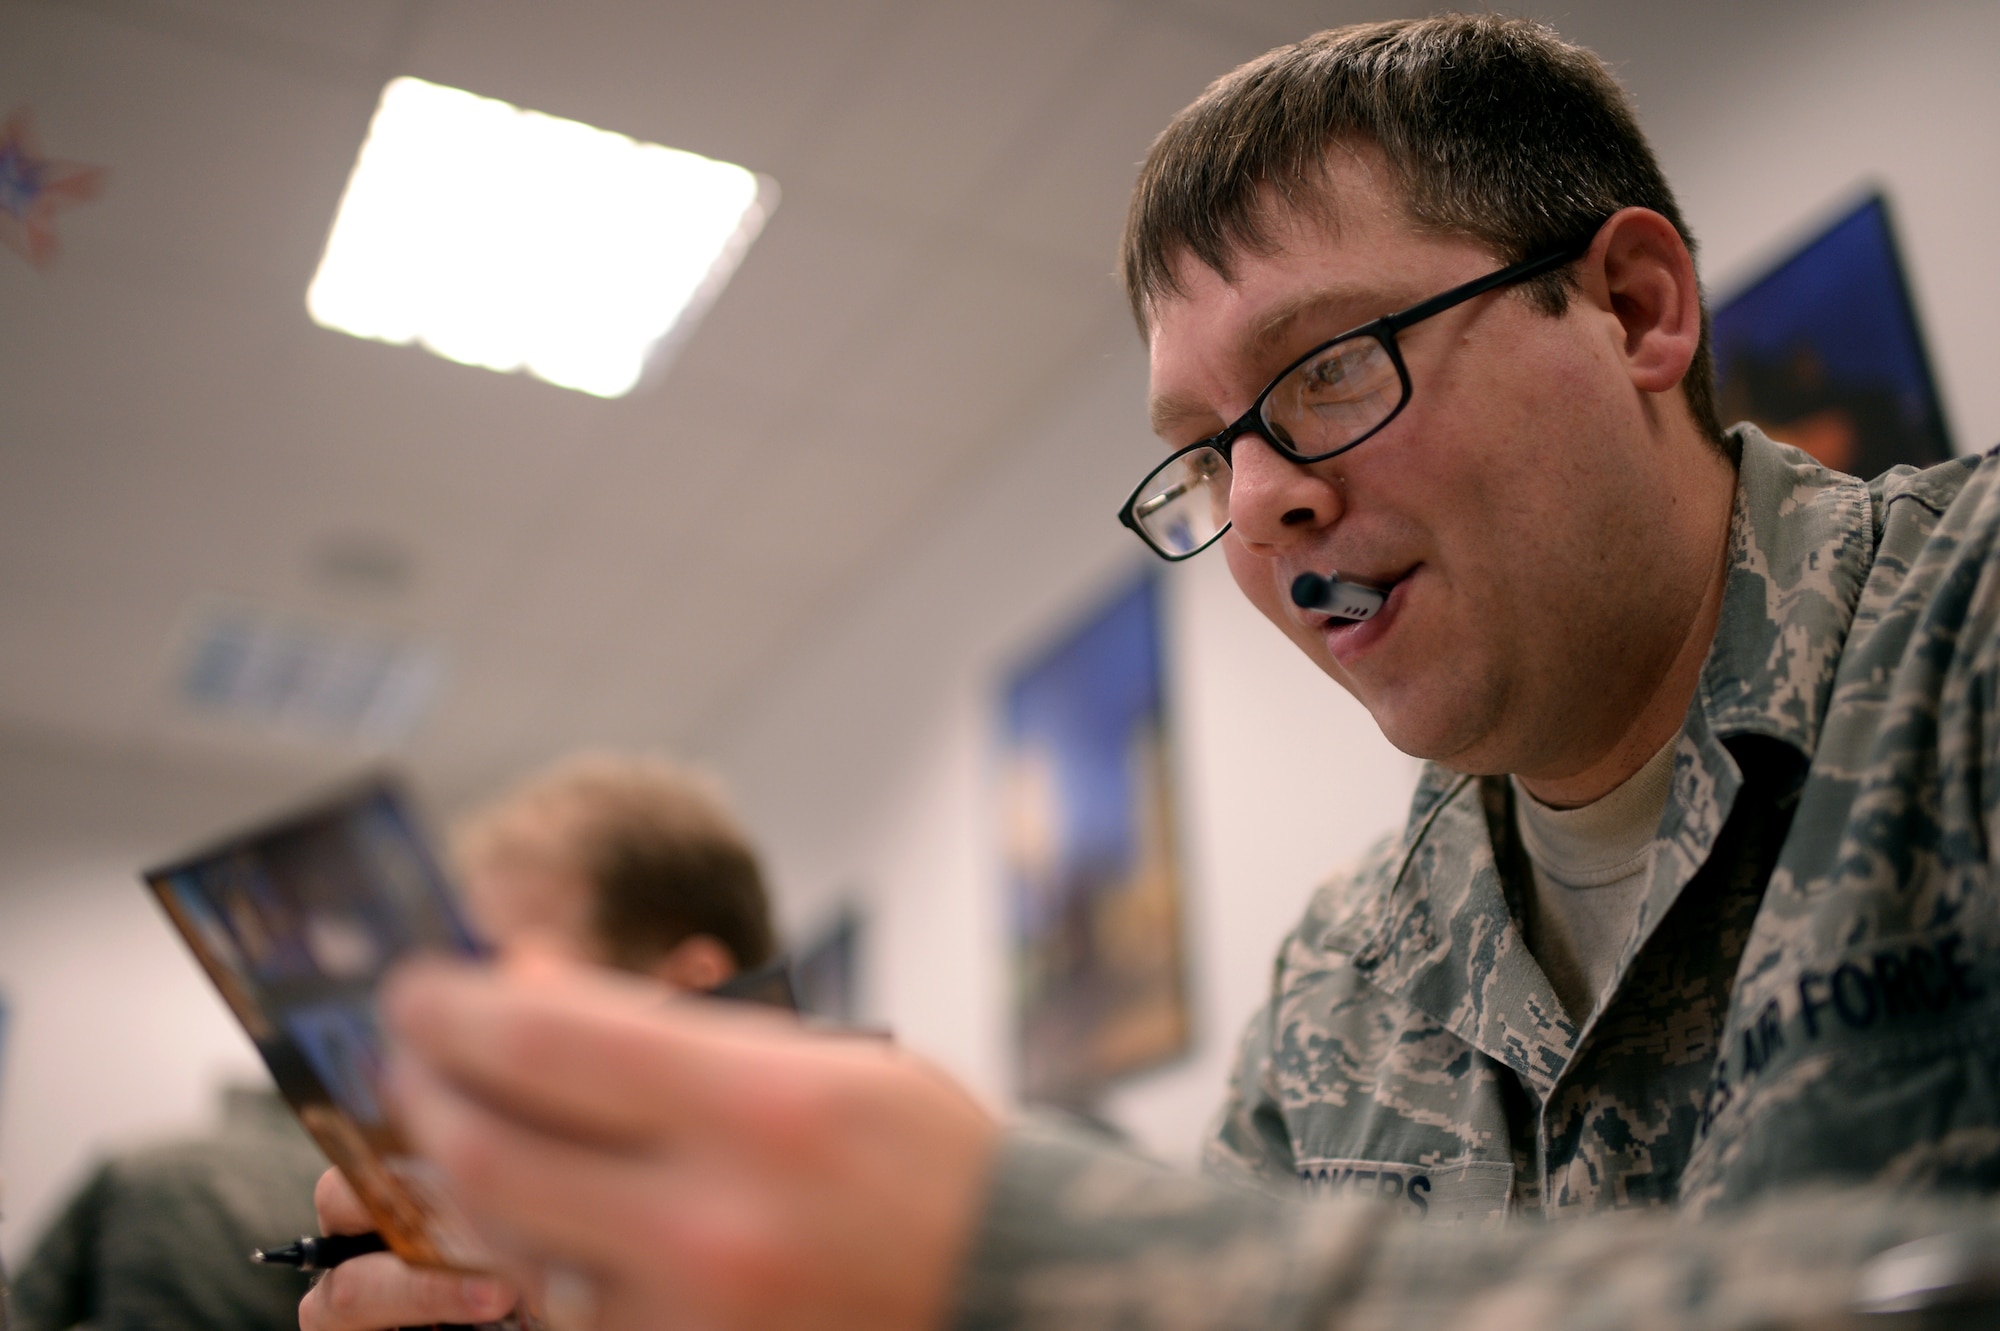 An Airman participates in a Four Lenses personality assessment Jan. 14, 2015, in the 52nd Force Support Squadron's Airman and Family Readiness Center at Spangdahlem Air Base, Germany. During this assessment, the participants had to review different photographs and phrases that best describe their personality. Then, the participants were separated into four colors — blue for people who value relationships; green for competency; orange for freedom; and gold structure. (U.S. Air Force photo by Staff Sgt. Daryl Knee/Released)